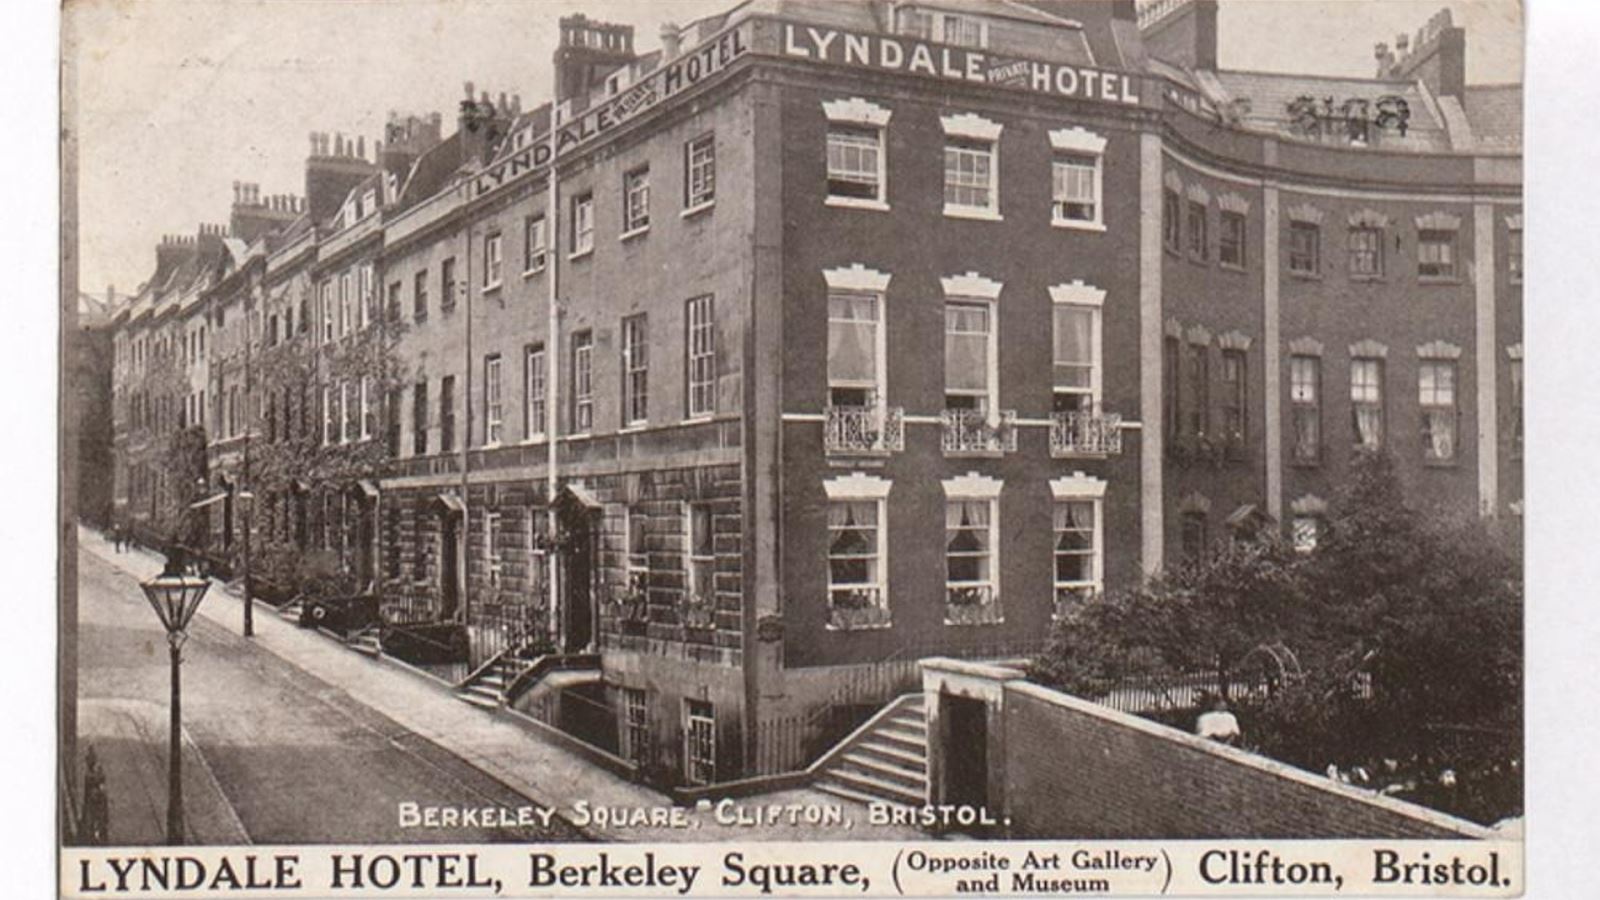 Lyndale Hotel. Image courtesy of Bristol Archives